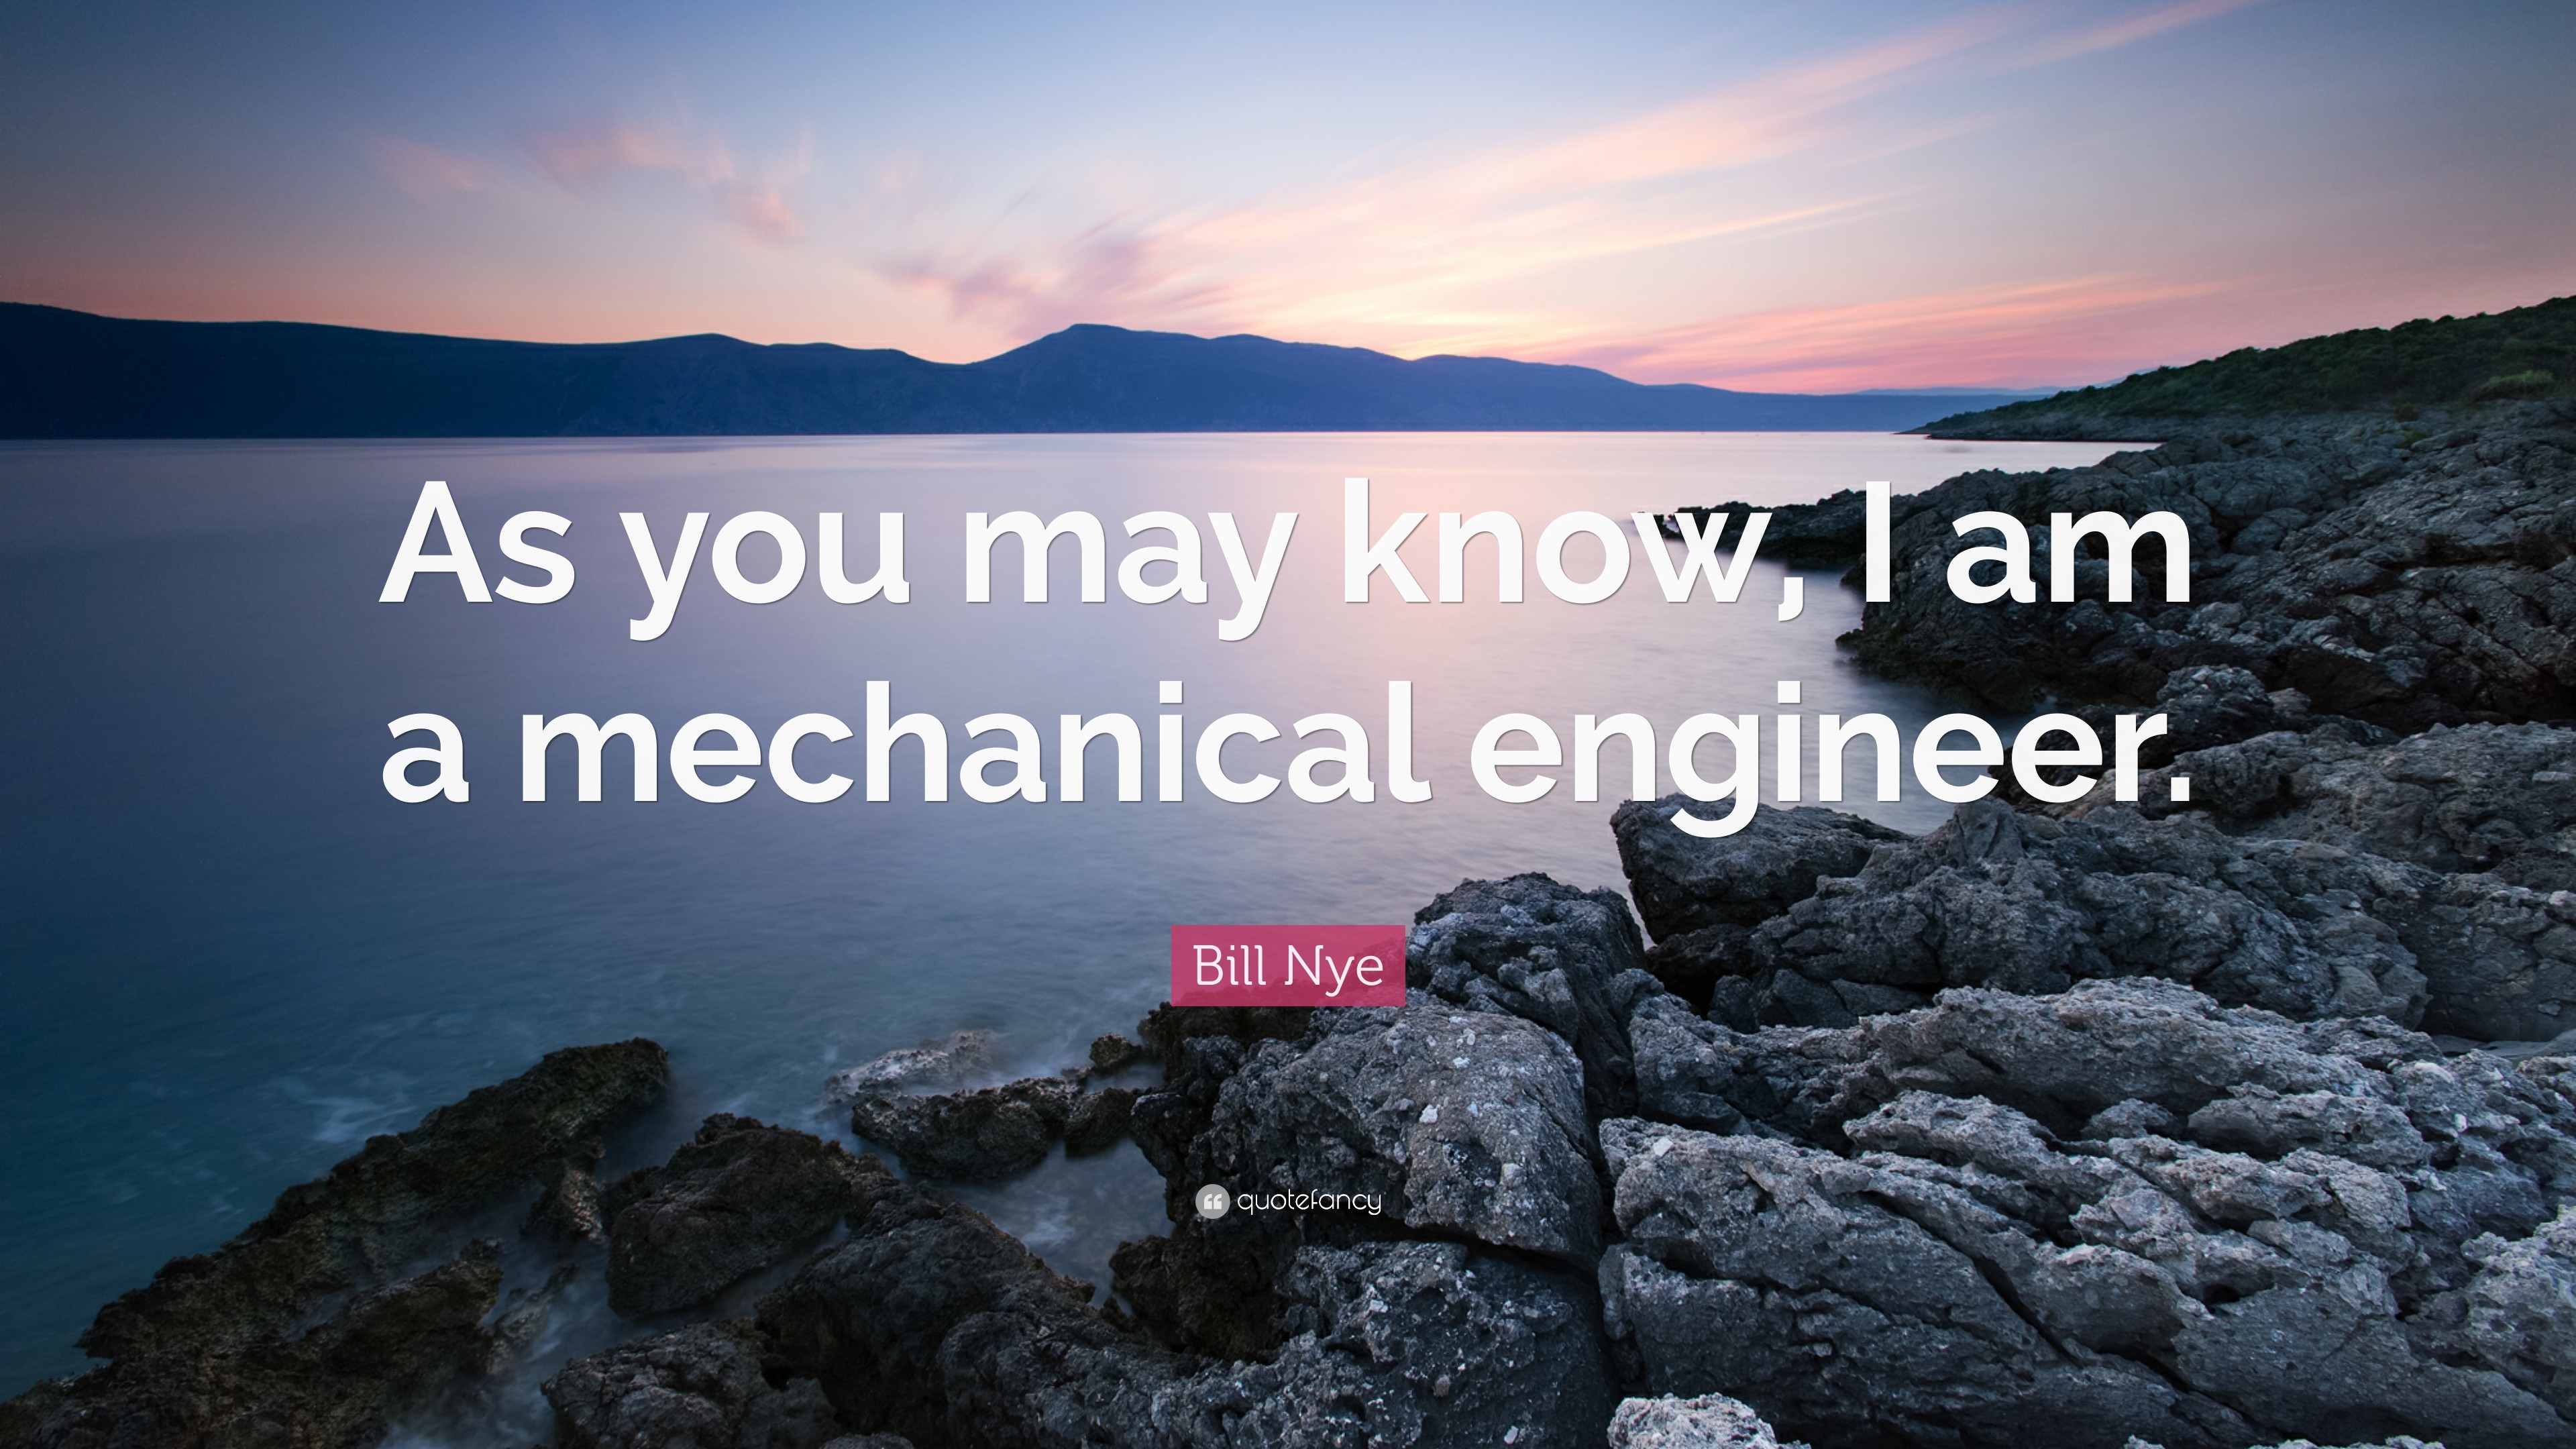 3840x2160 Bill Nye Quote: “As you may know, I am a mechanical engineer.